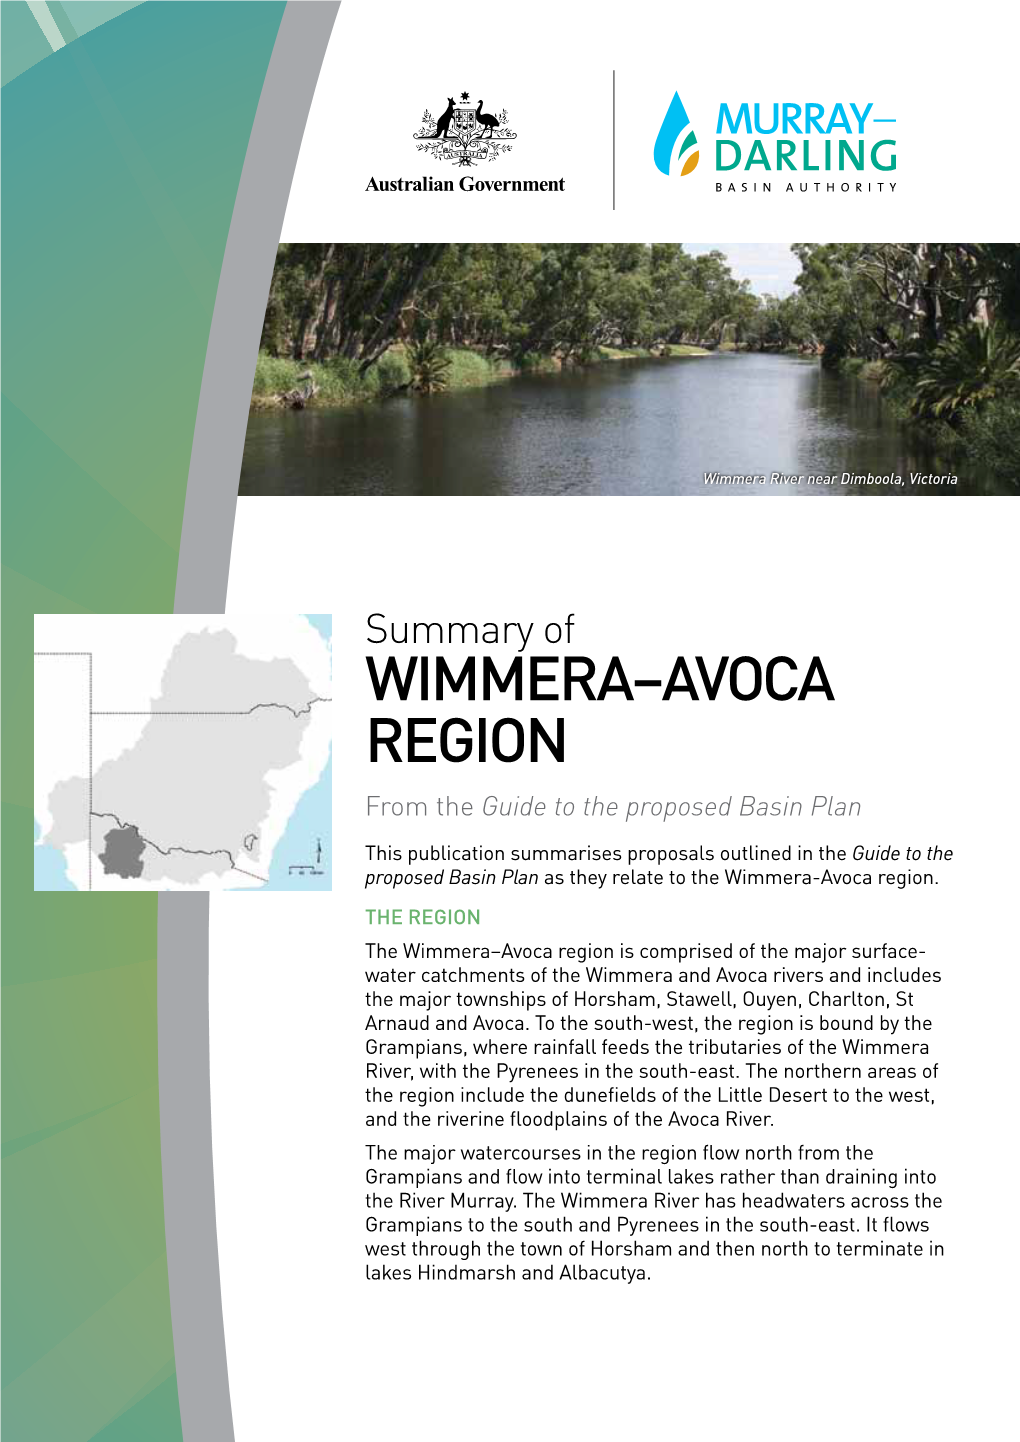 WIMMERA–AVOCA REGION from the Guide to the Proposed Basin Plan